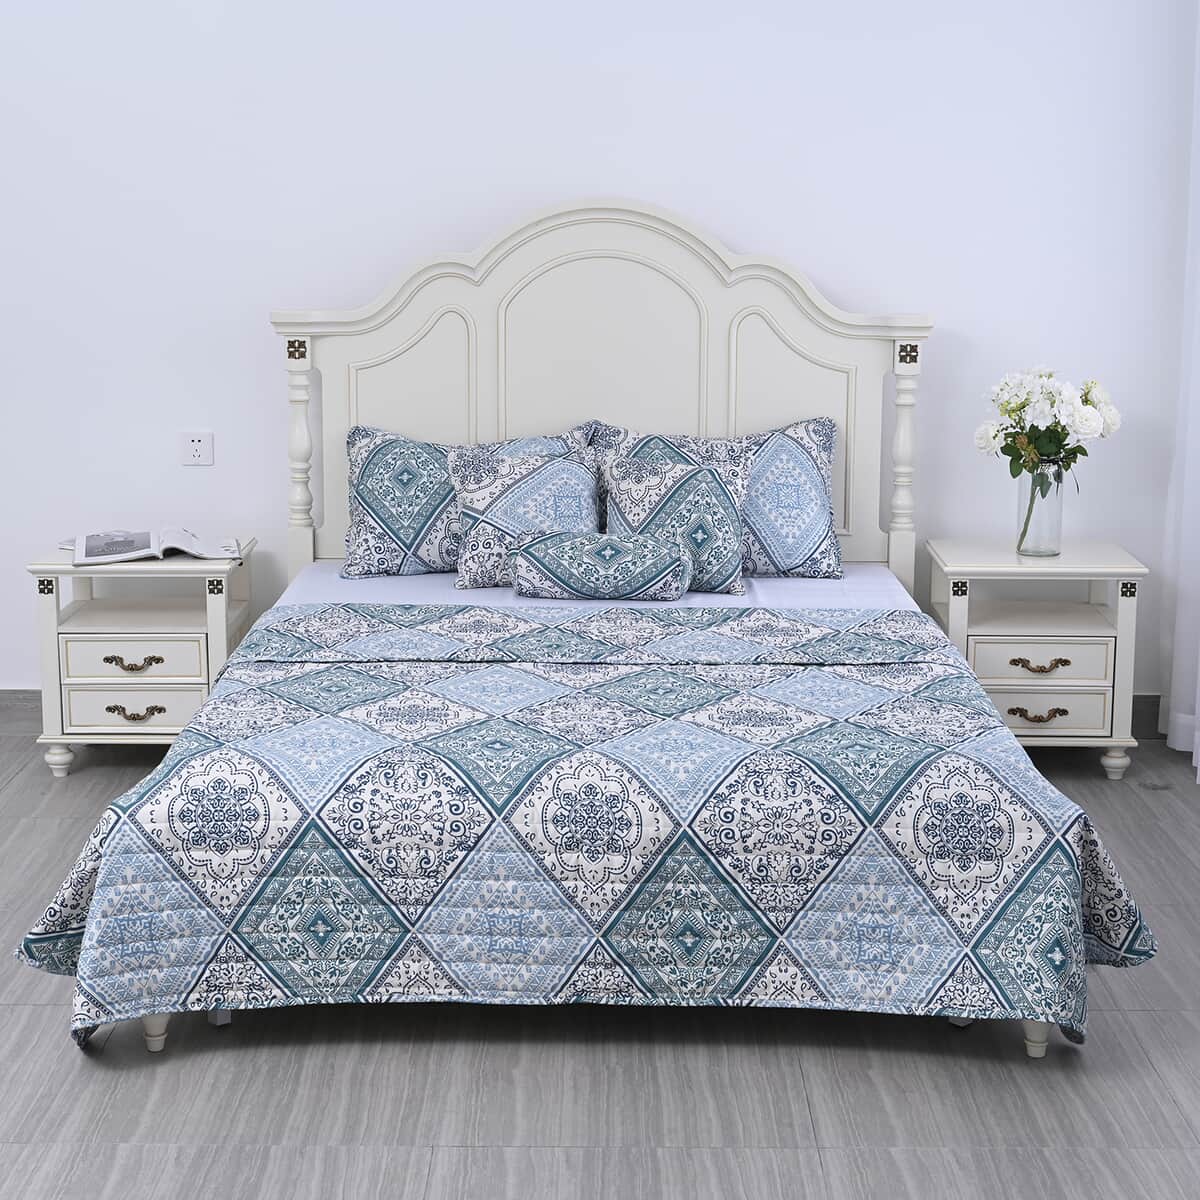 Homesmart Blue and Green Flower Printed 6pcs Quilt Set - Queen (100% Microfiber) image number 1